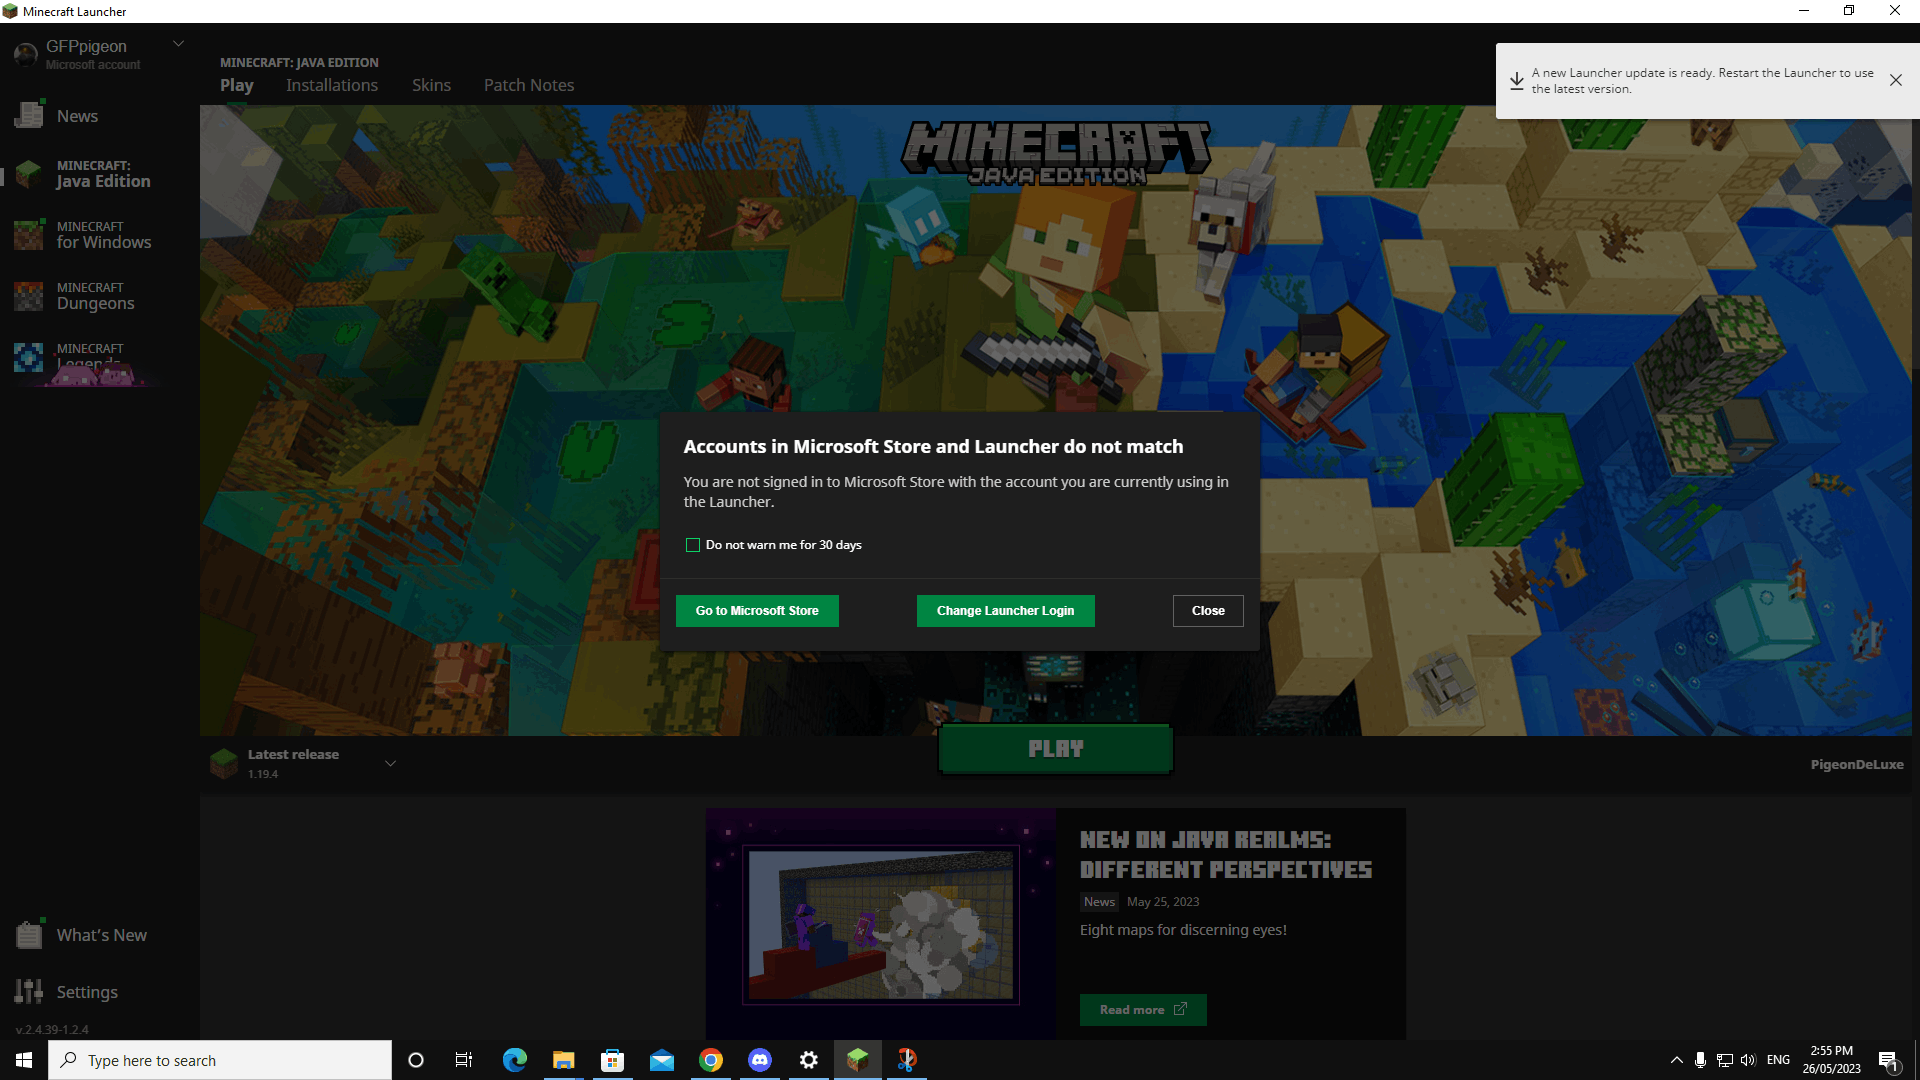 minecraft for windows 10 not starting installation, just says 'waiting for installation' [​IMG]